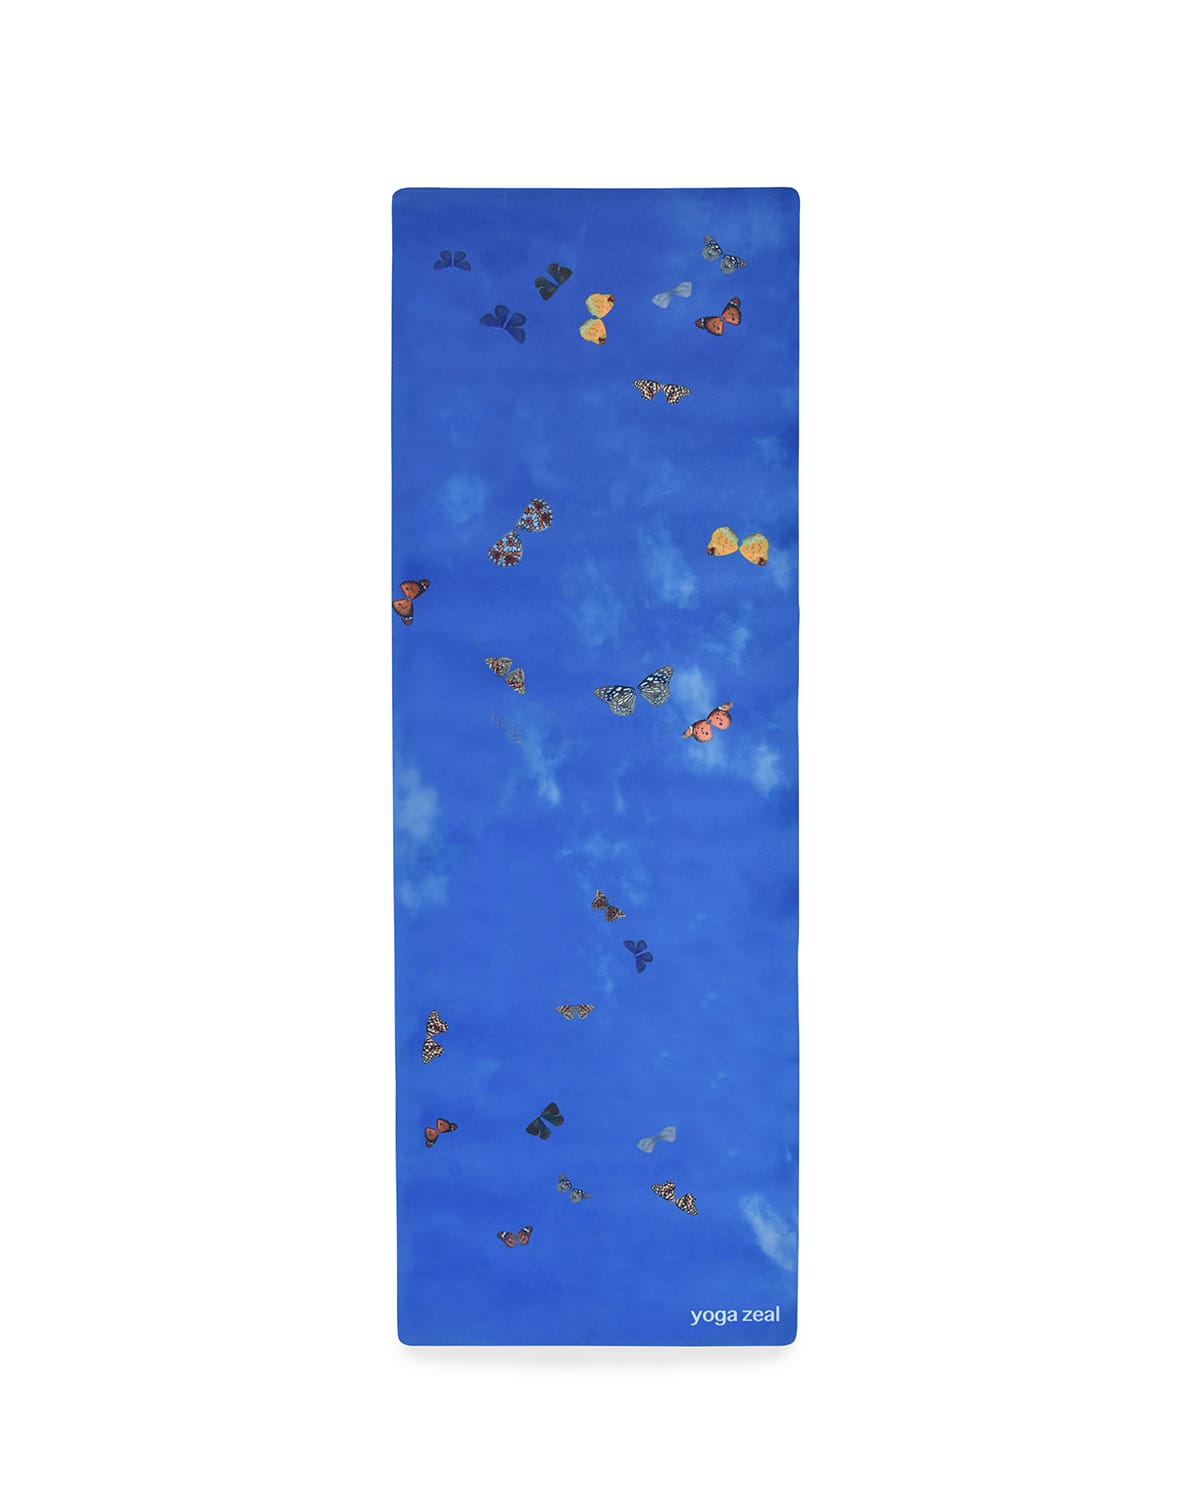 YOGA ZEAL BUTTERFLY PRINTED YOGA MAT